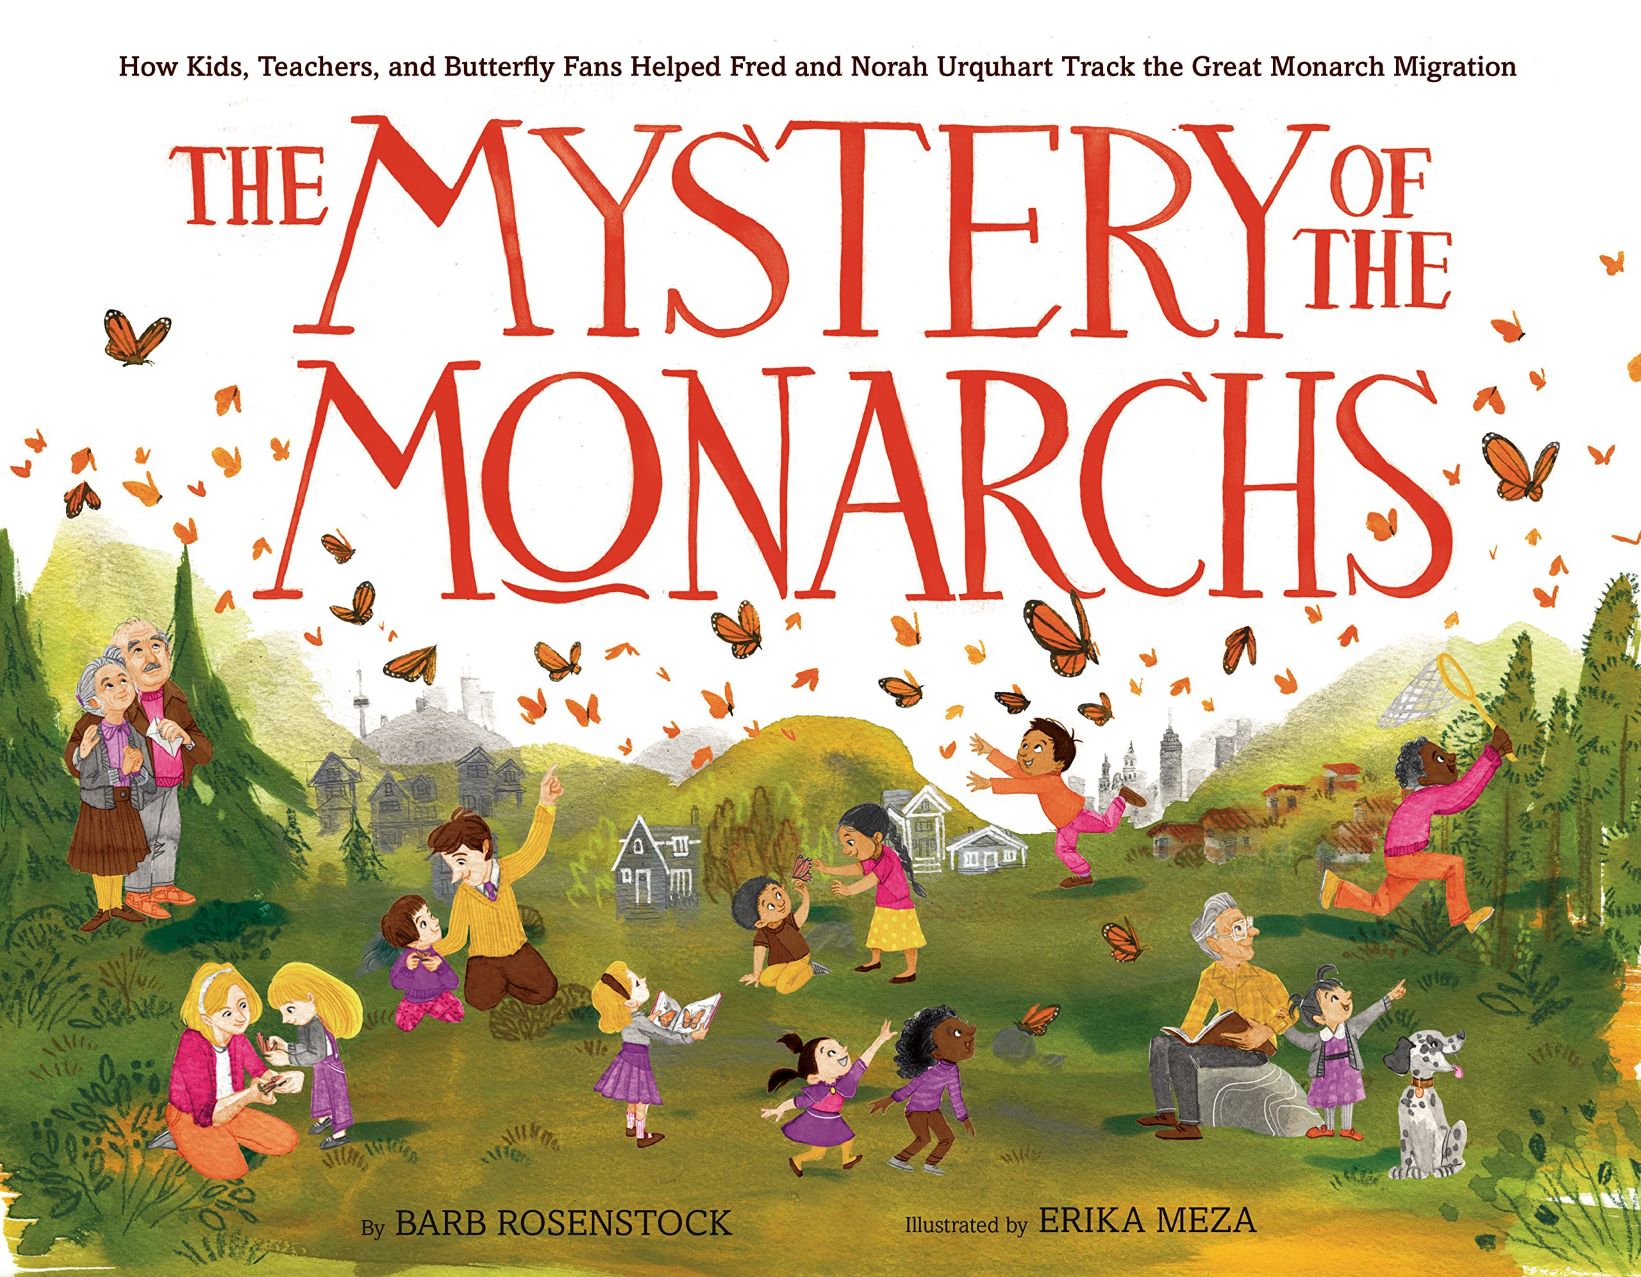 The Mystery of the Monarchs: How Kids, Teachers, and Butterfly Fans Helped Fred and Norah Urquhart Track the Great Monarch Migration